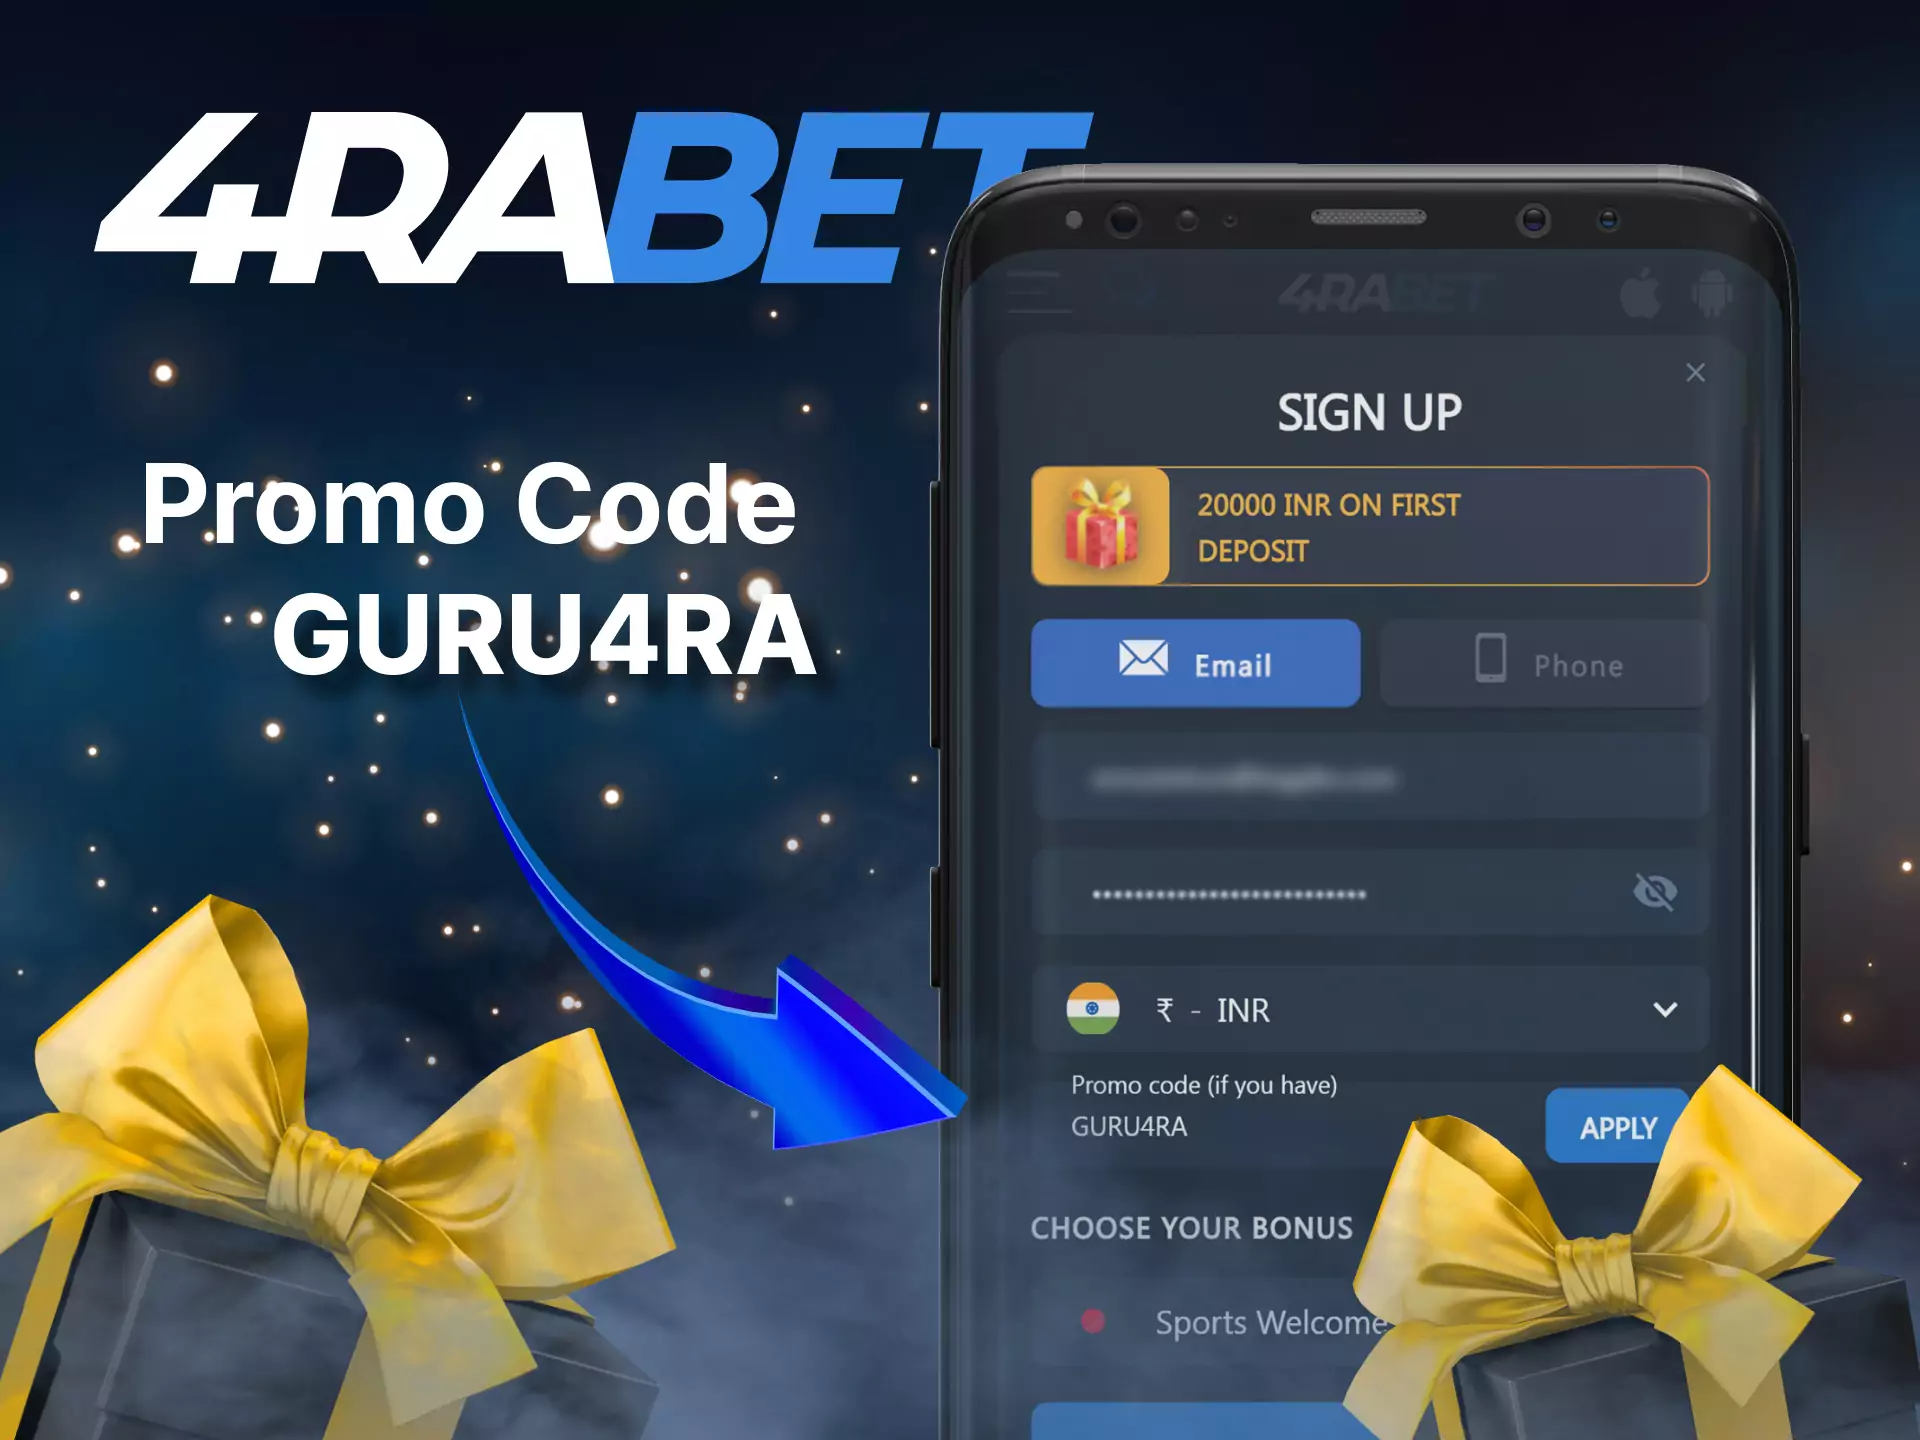 Use a special promo code in the 4rabet mobile app.